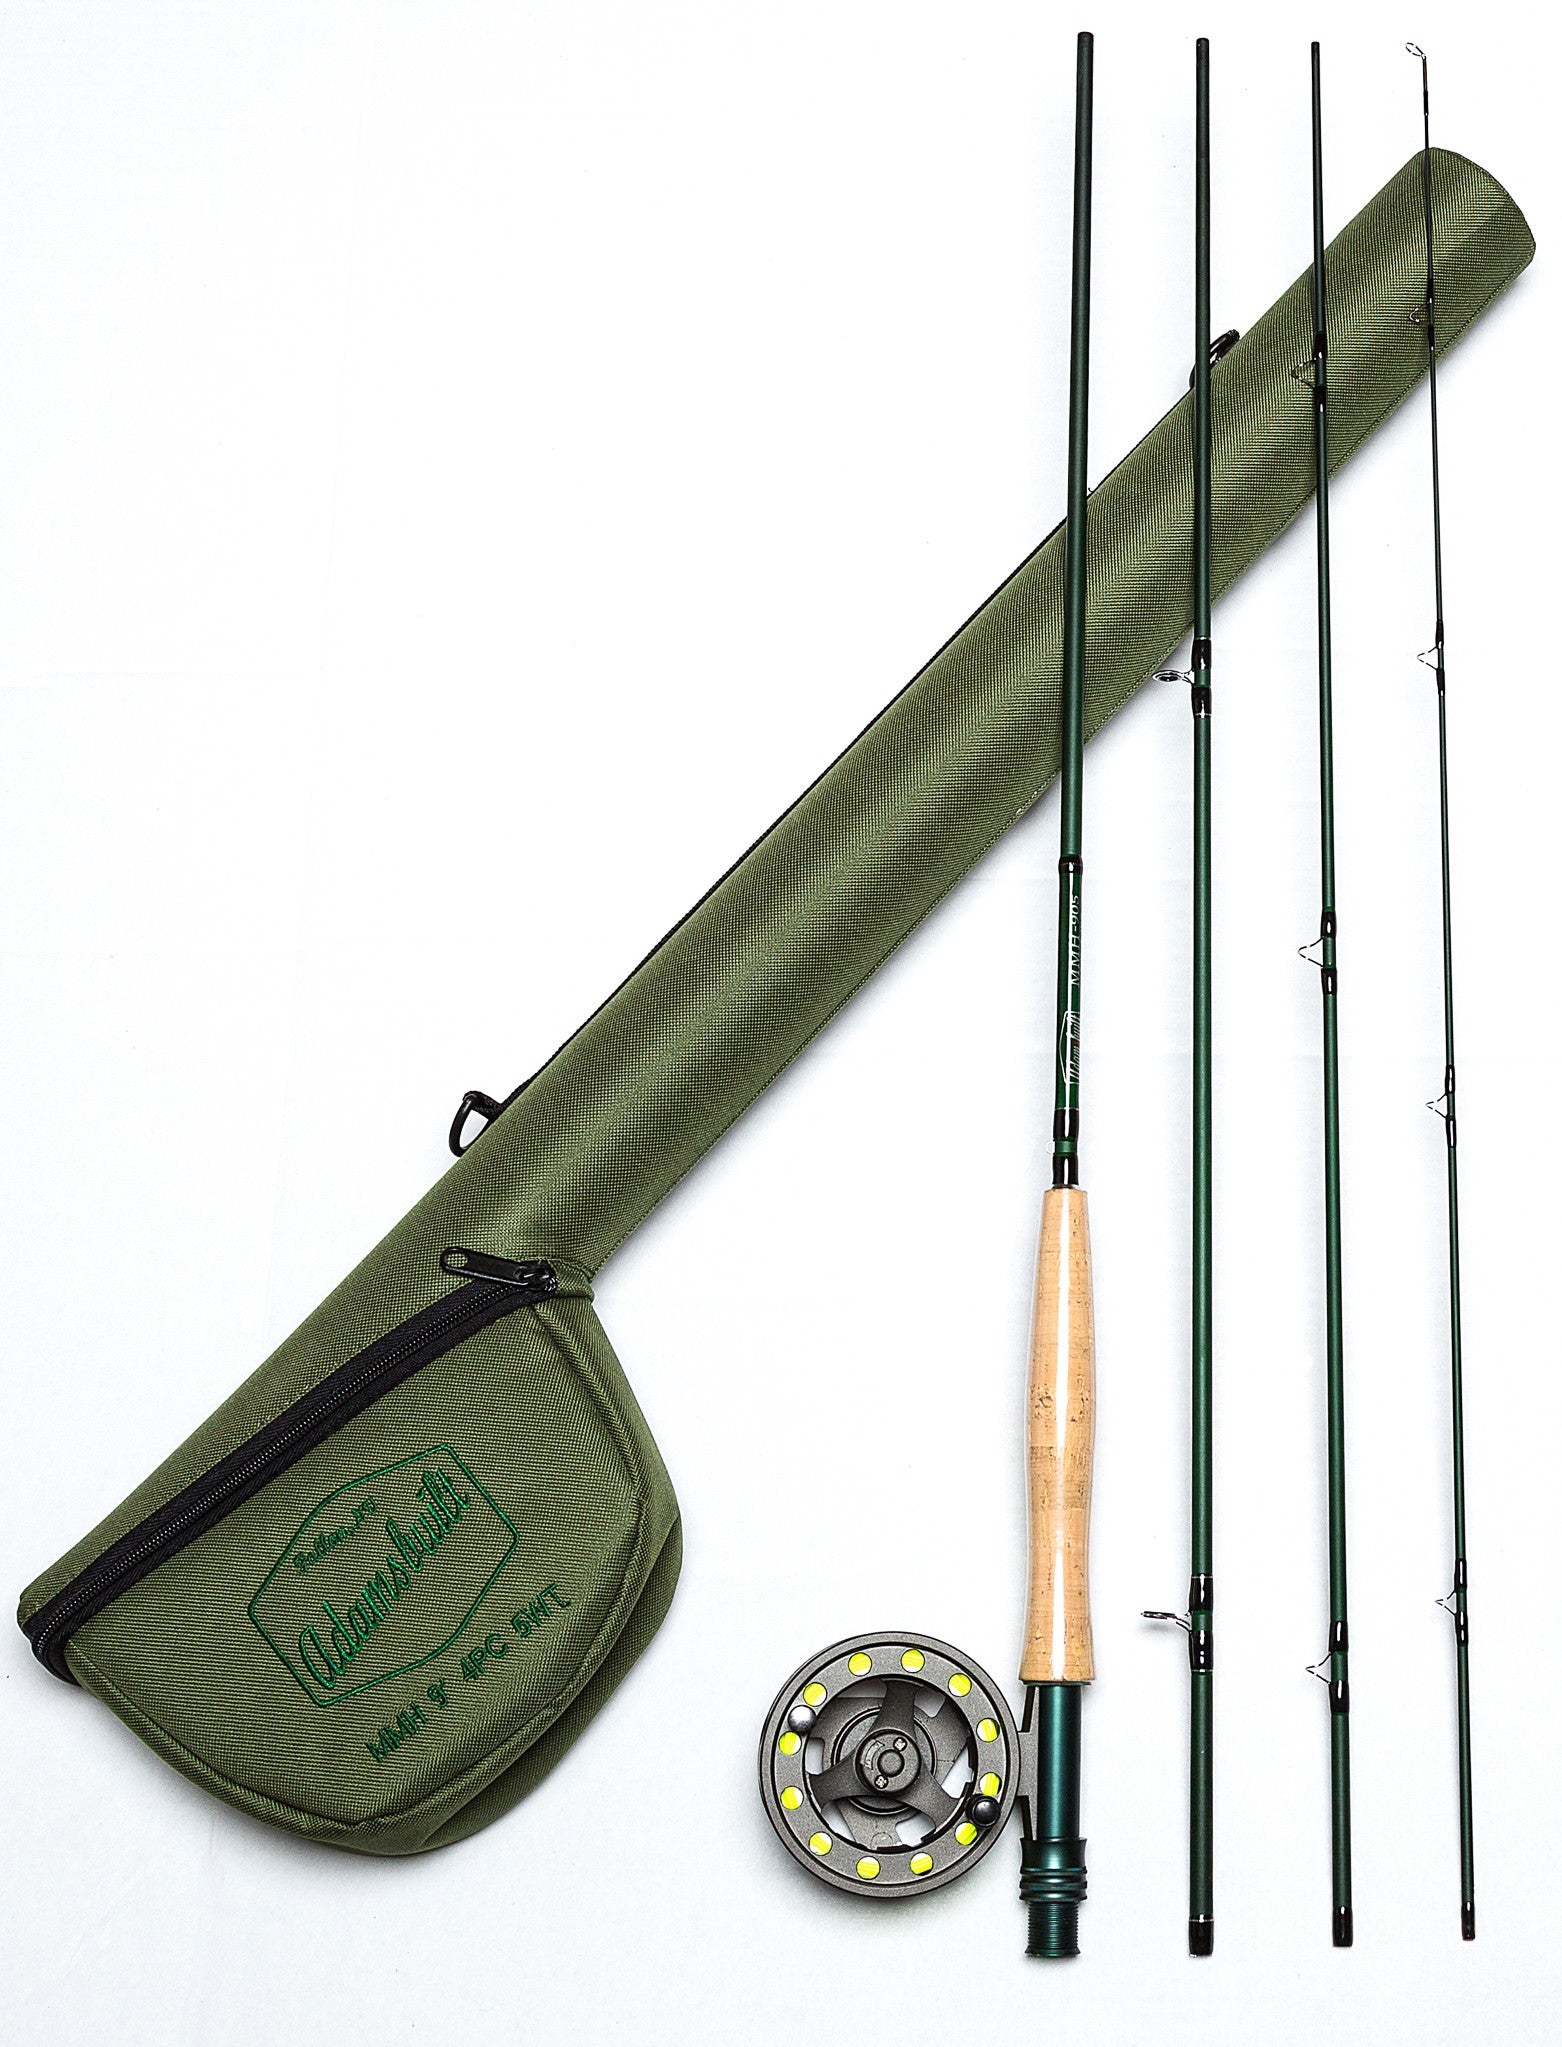 5 Weight Fly Rod Combo 2024